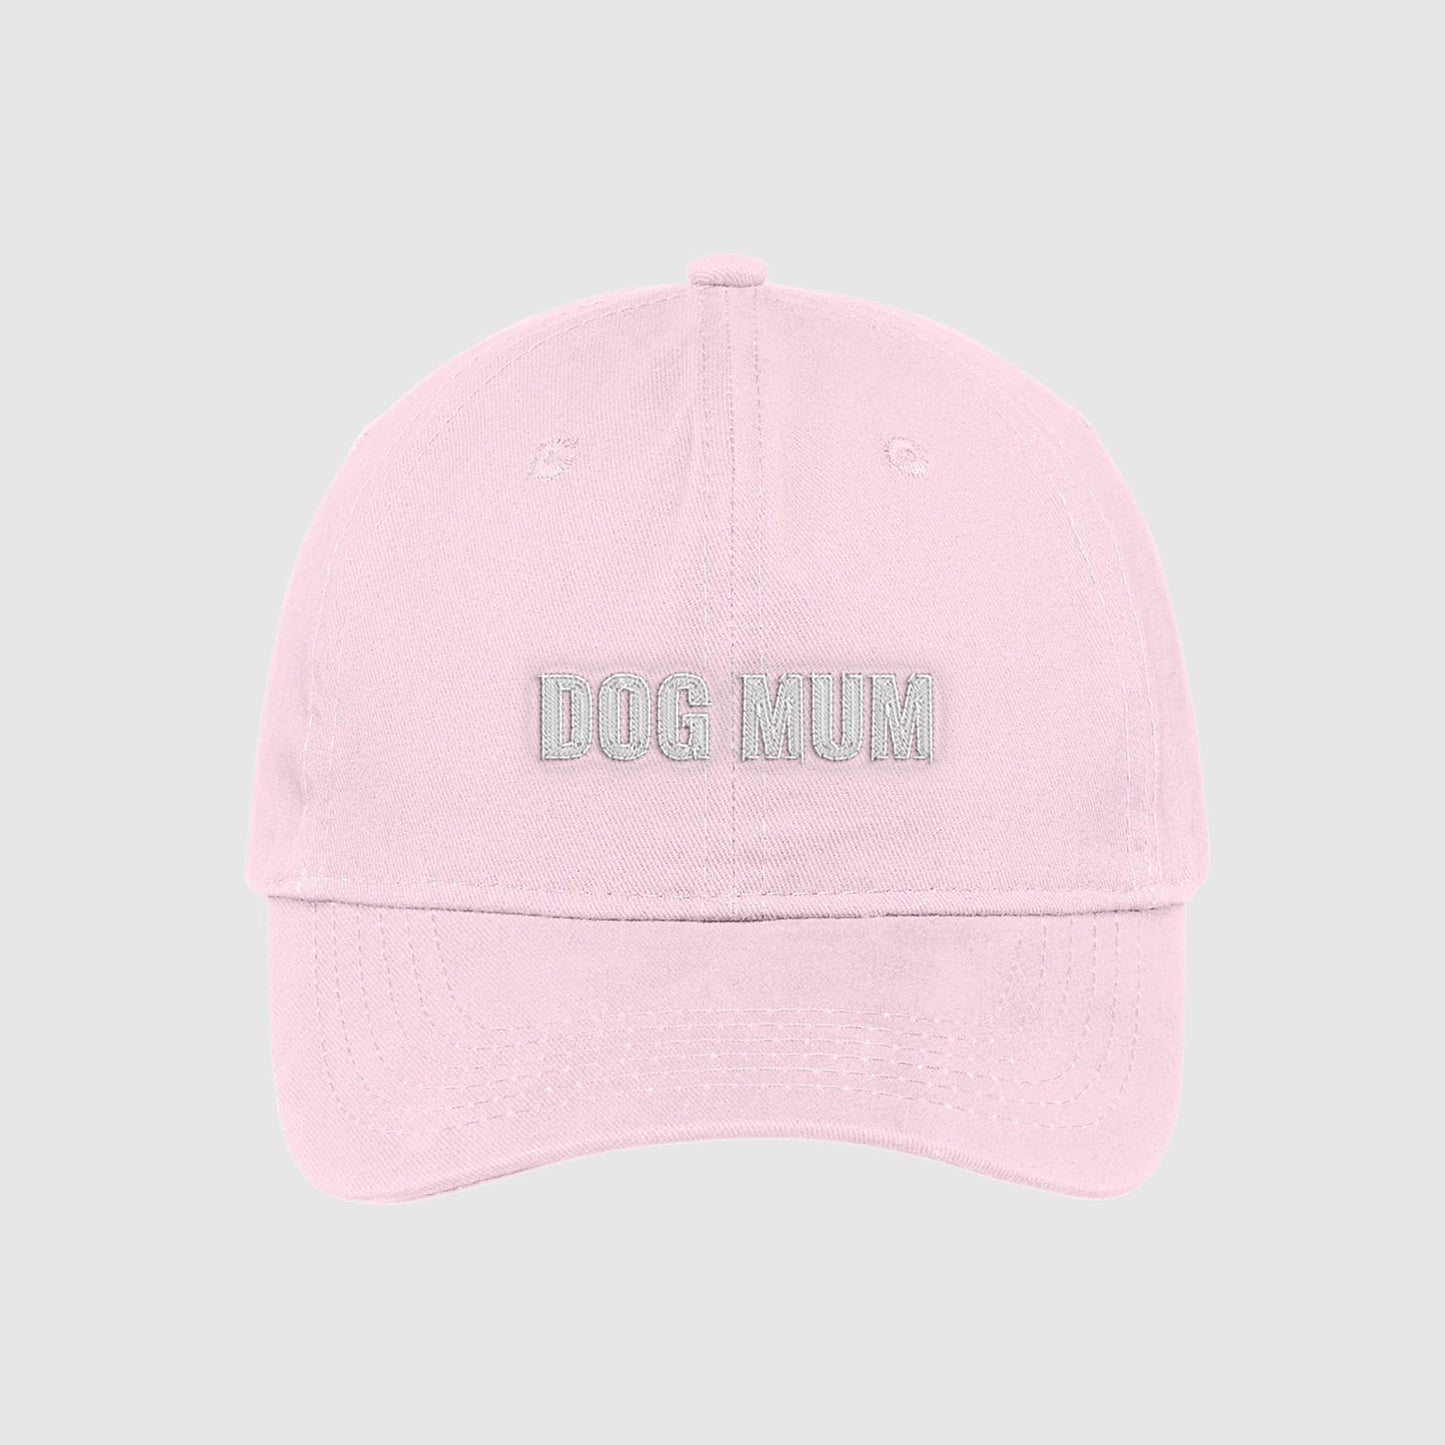 Blush pink Dog Mum Hat embroidered with white text.